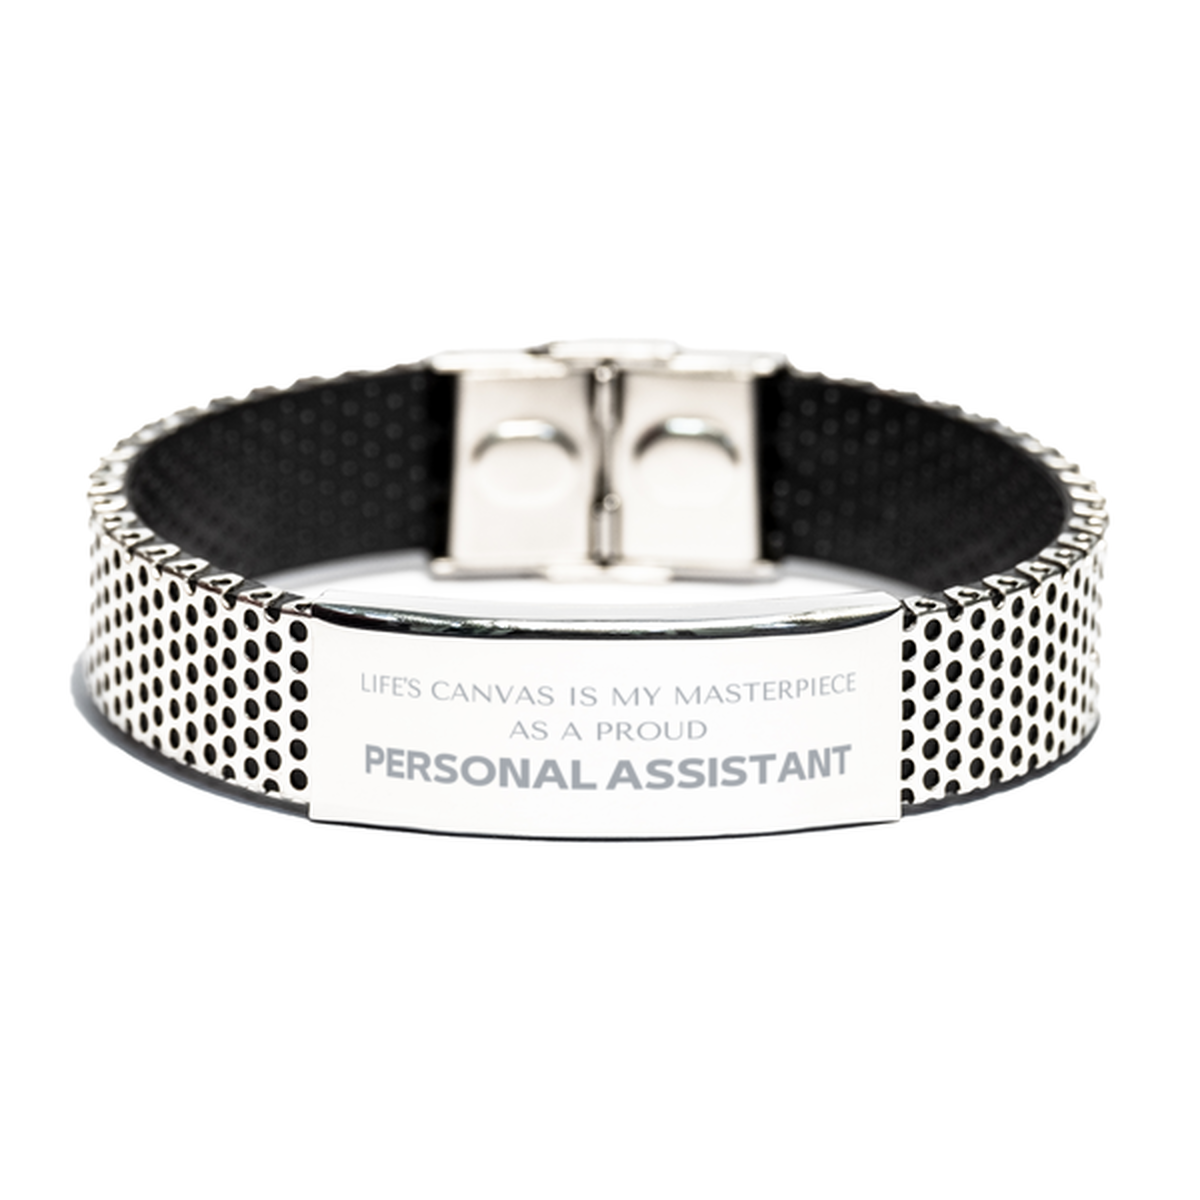 Proud Personal Assistant Gifts, Life's canvas is my masterpiece, Epic Birthday Christmas Unique Stainless Steel Bracelet For Personal Assistant, Coworkers, Men, Women, Friends